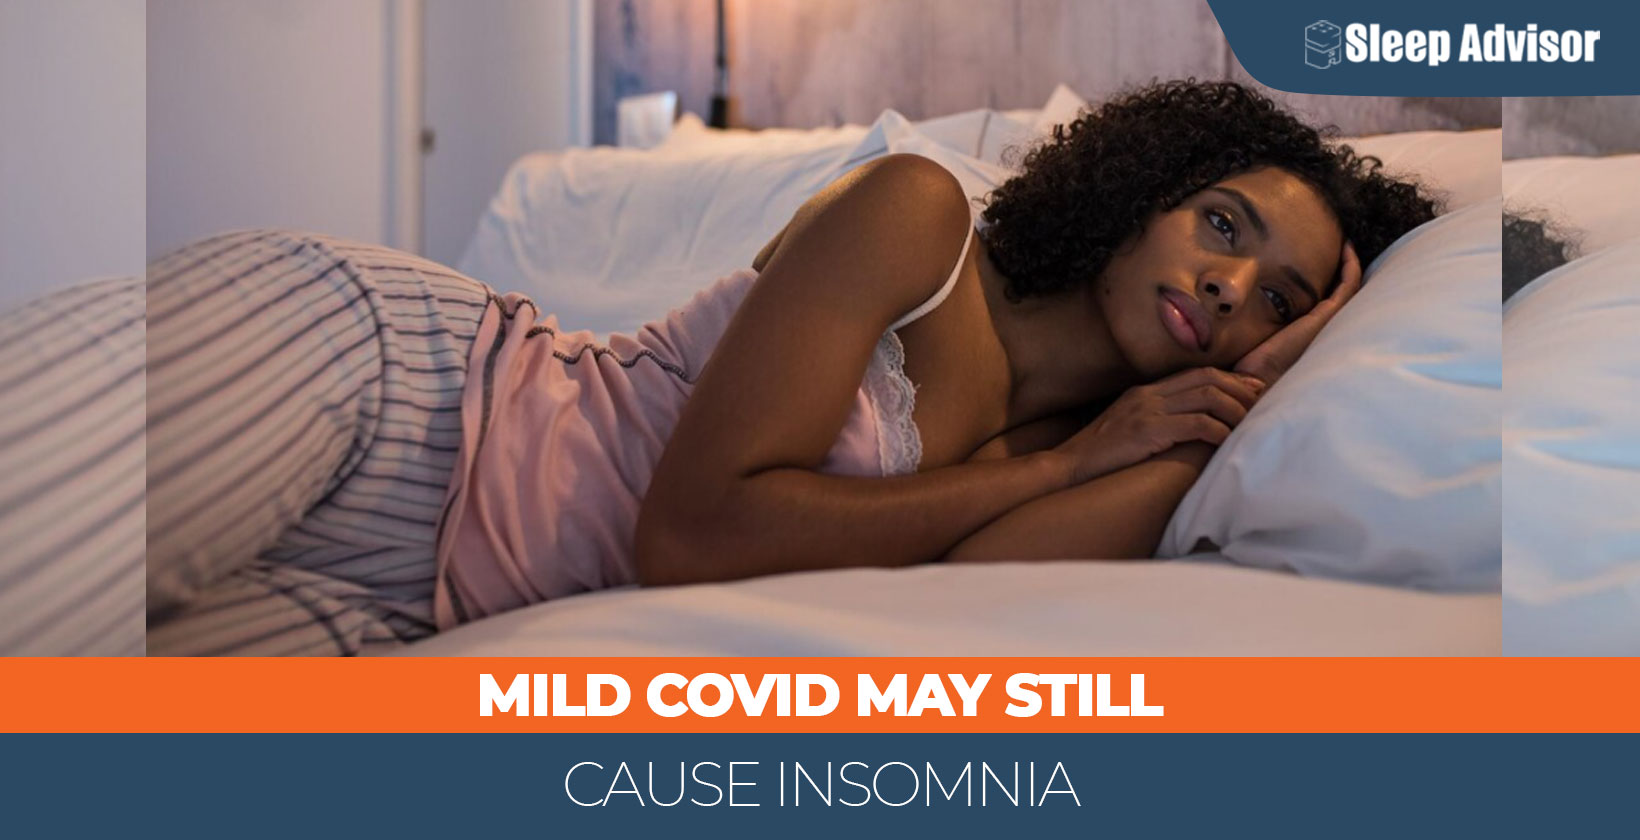 New Study: Mild COVID-19 May Cause Insomnia